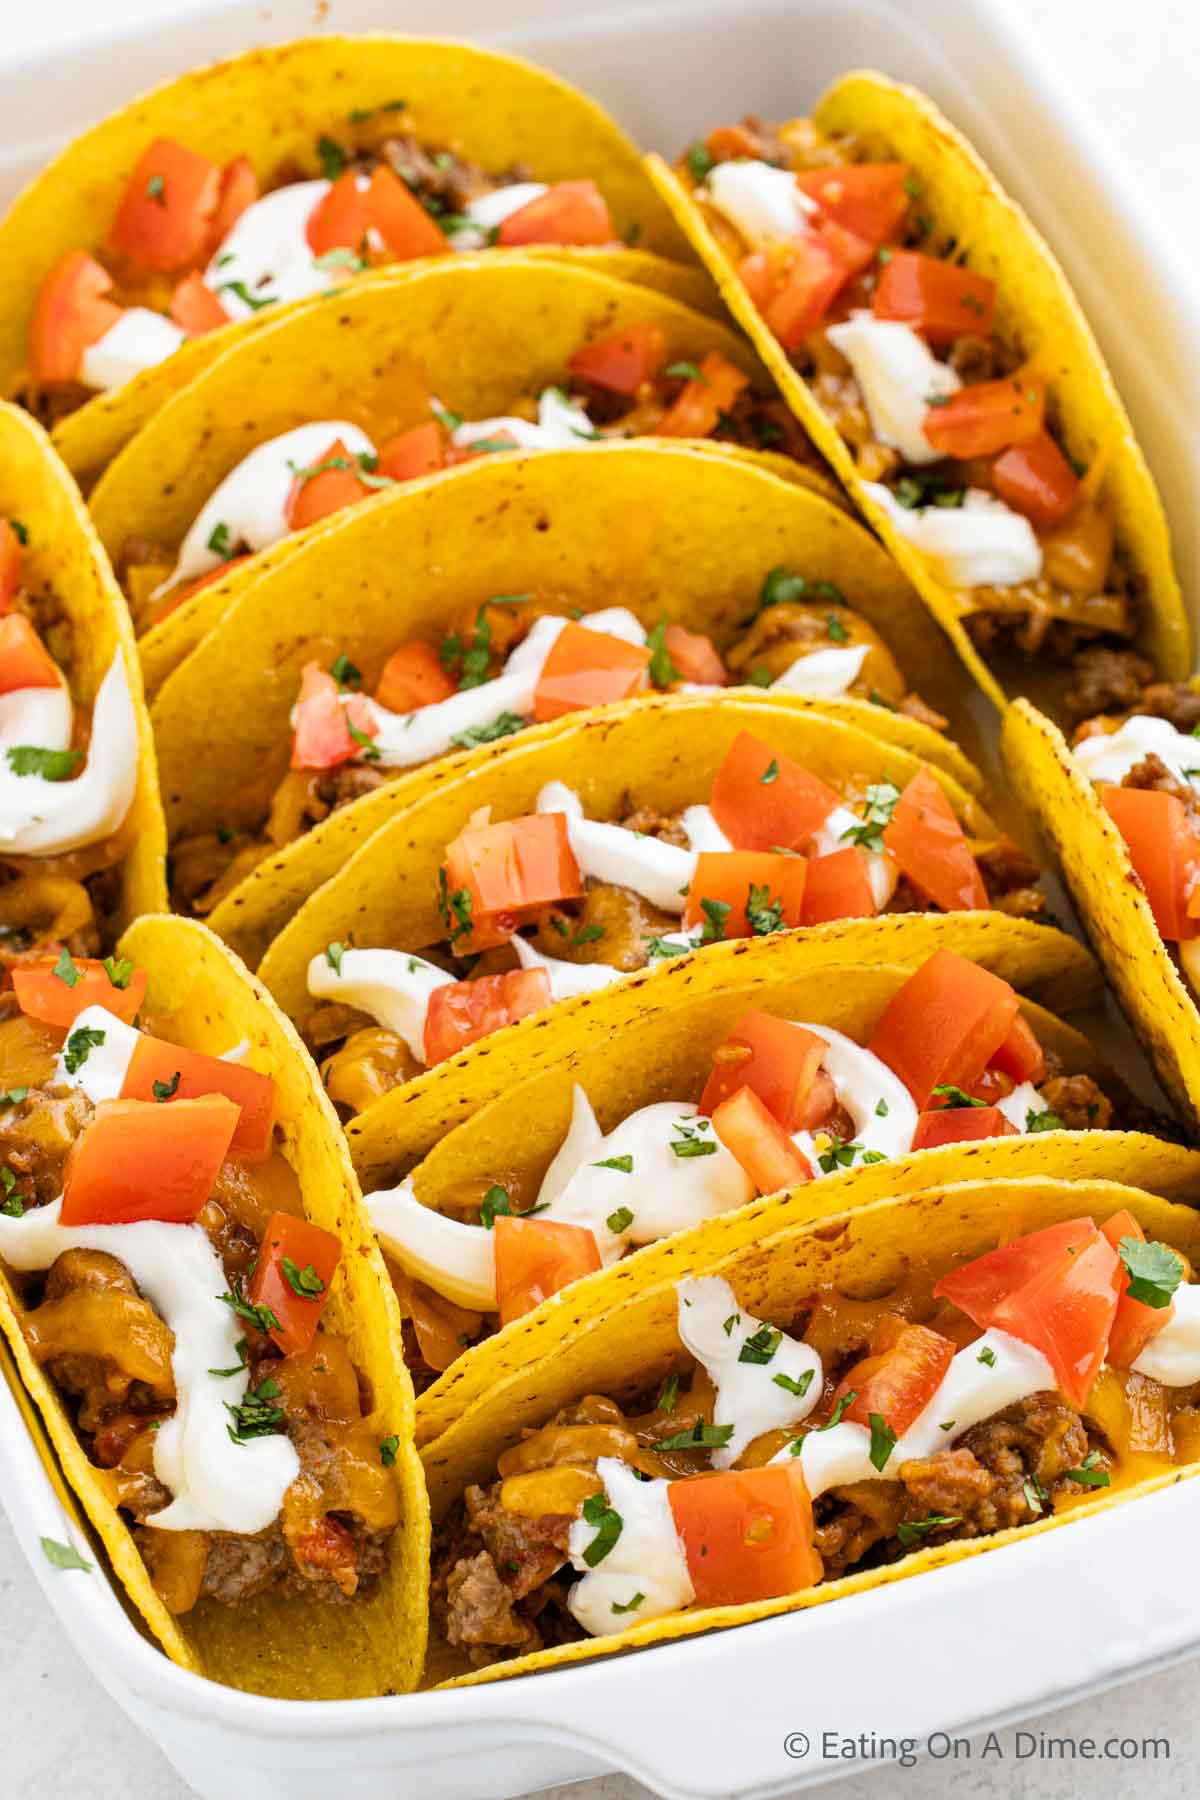 Oven baked tacos in a baking dish